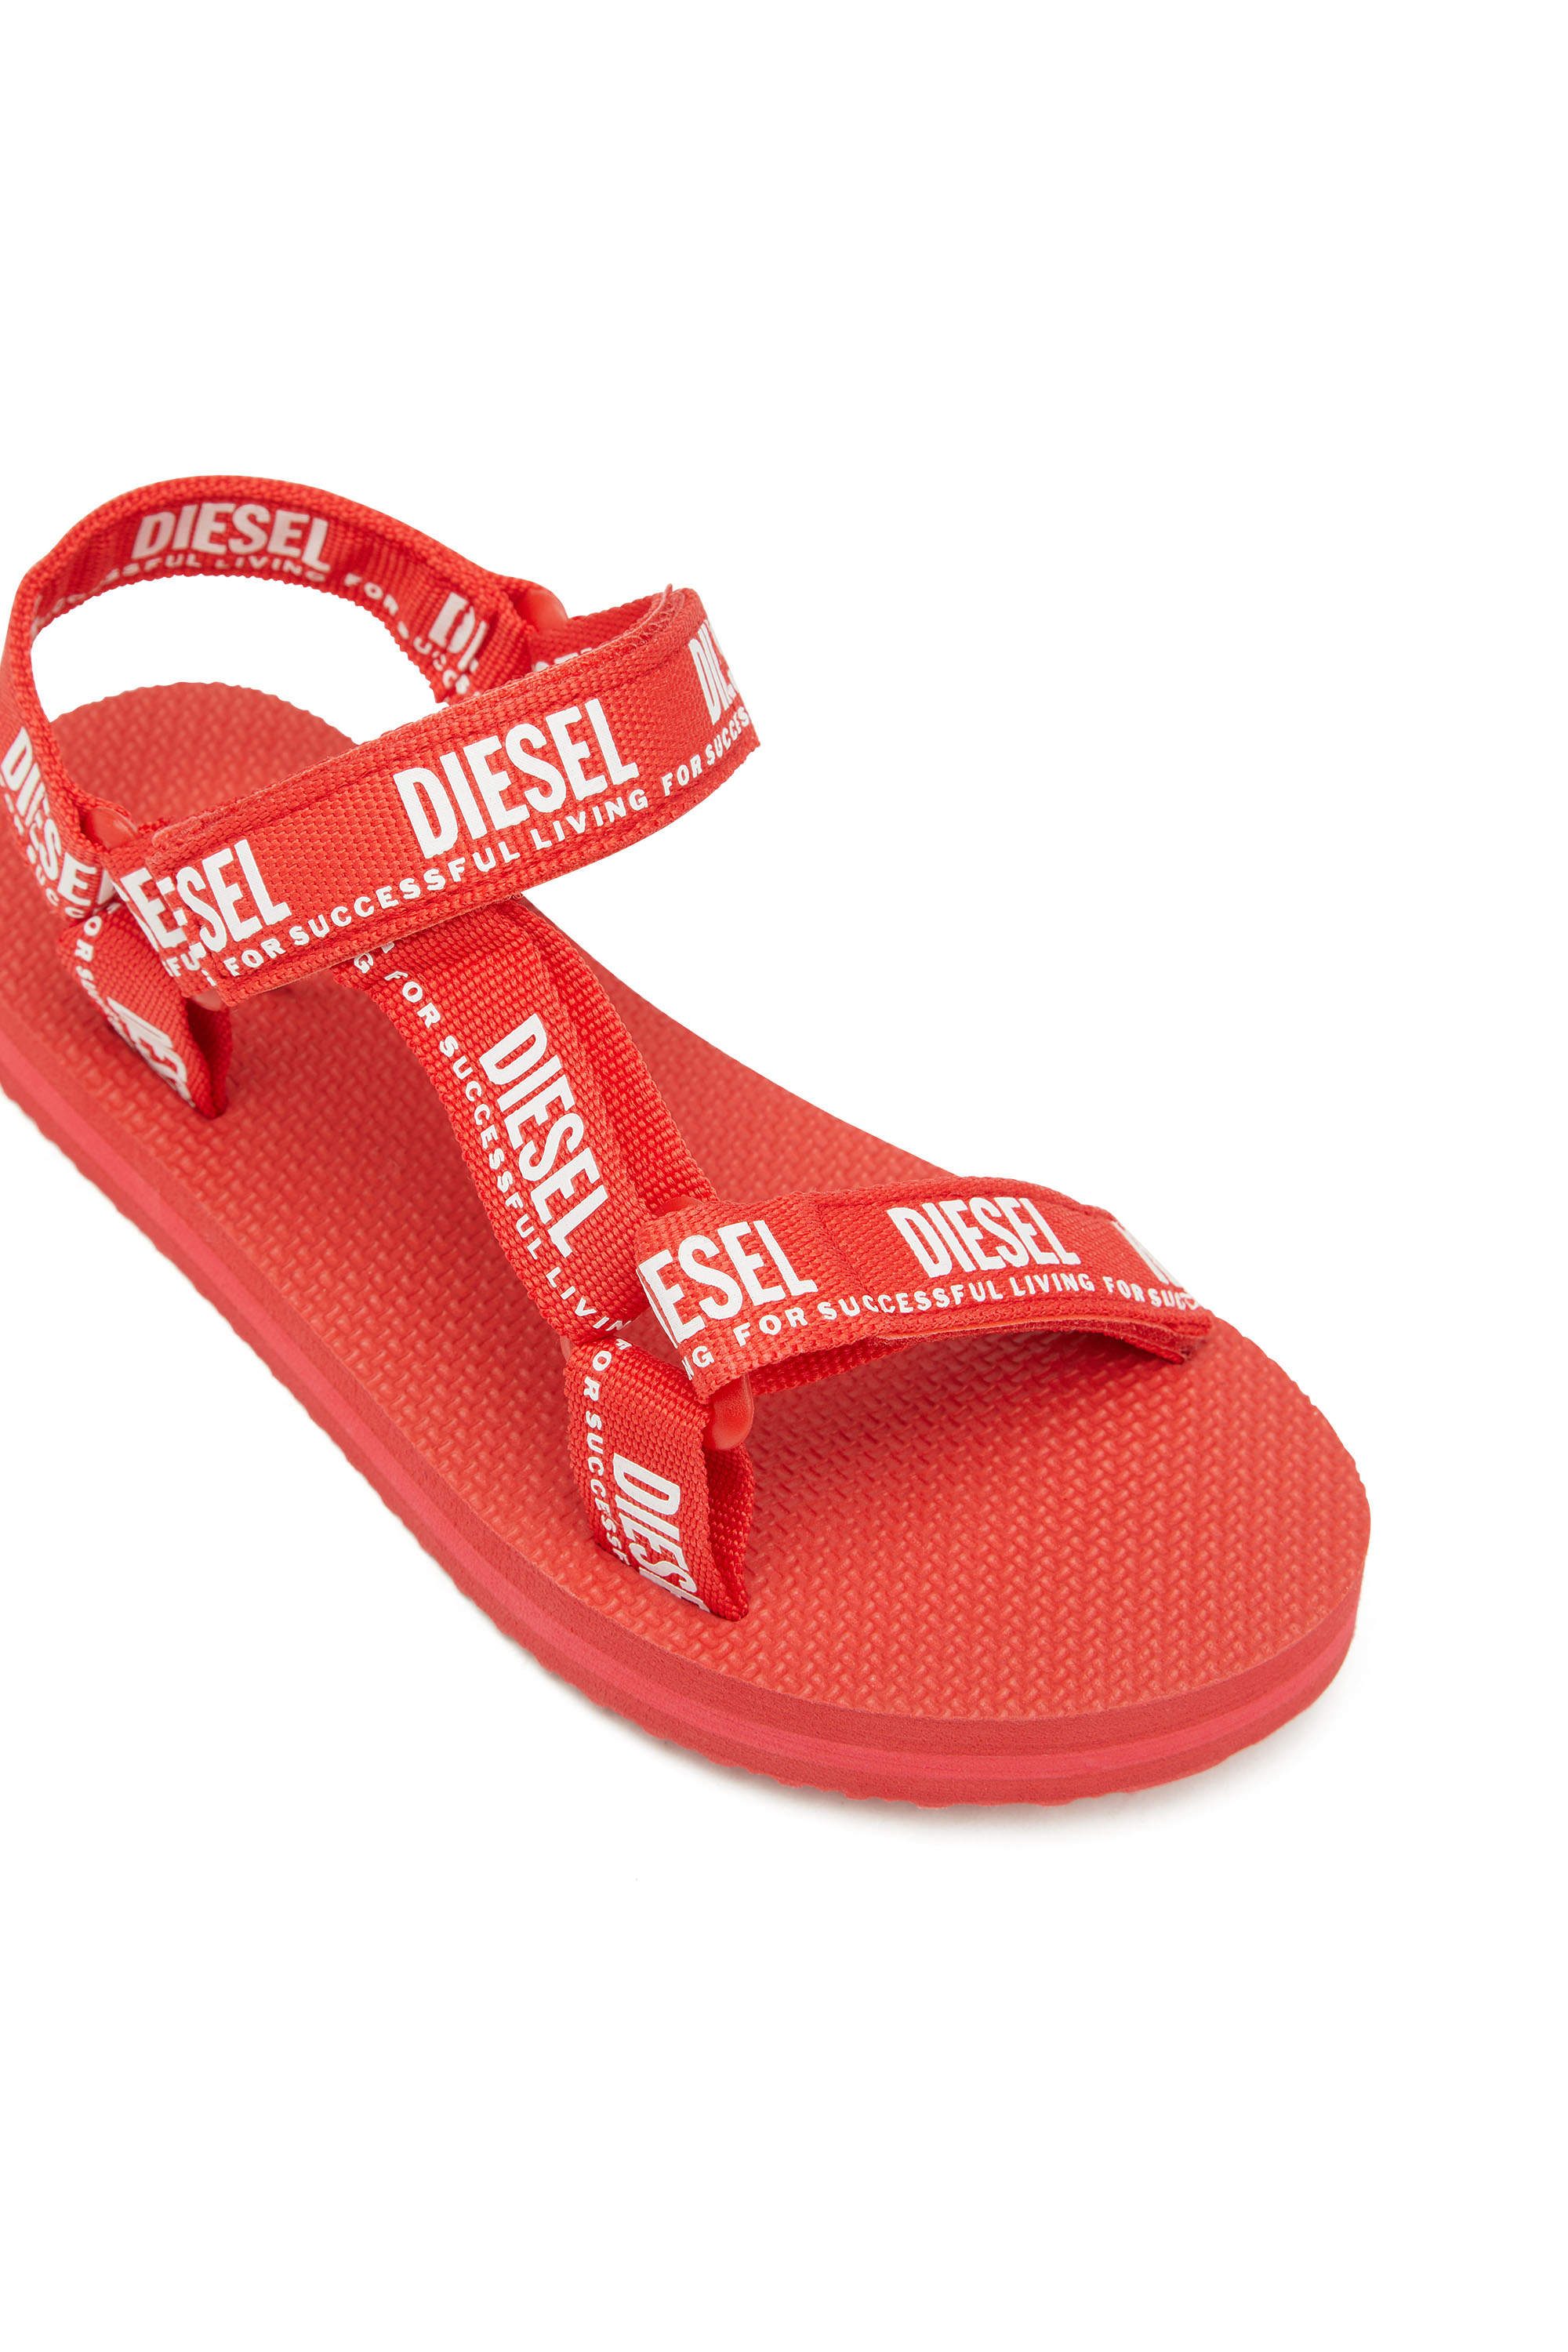 Diesel - S-ANDAL T, Red - Image 4